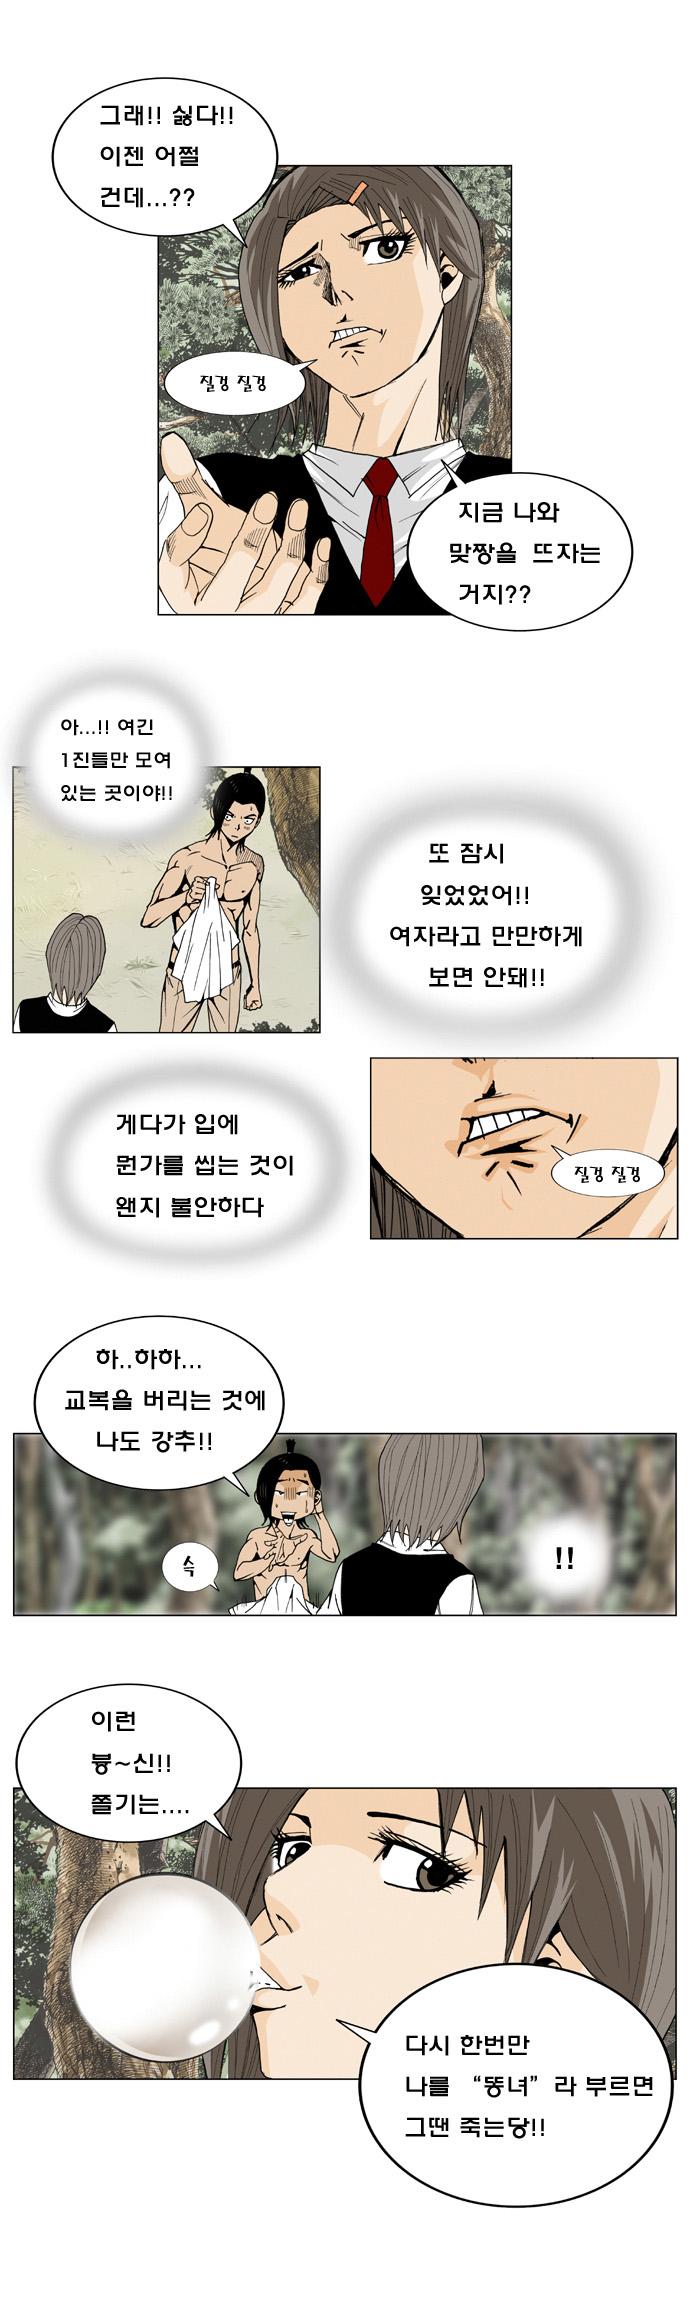 Ultimate Legend - Kang Hae Hyo - Chapter 3 - Page 3